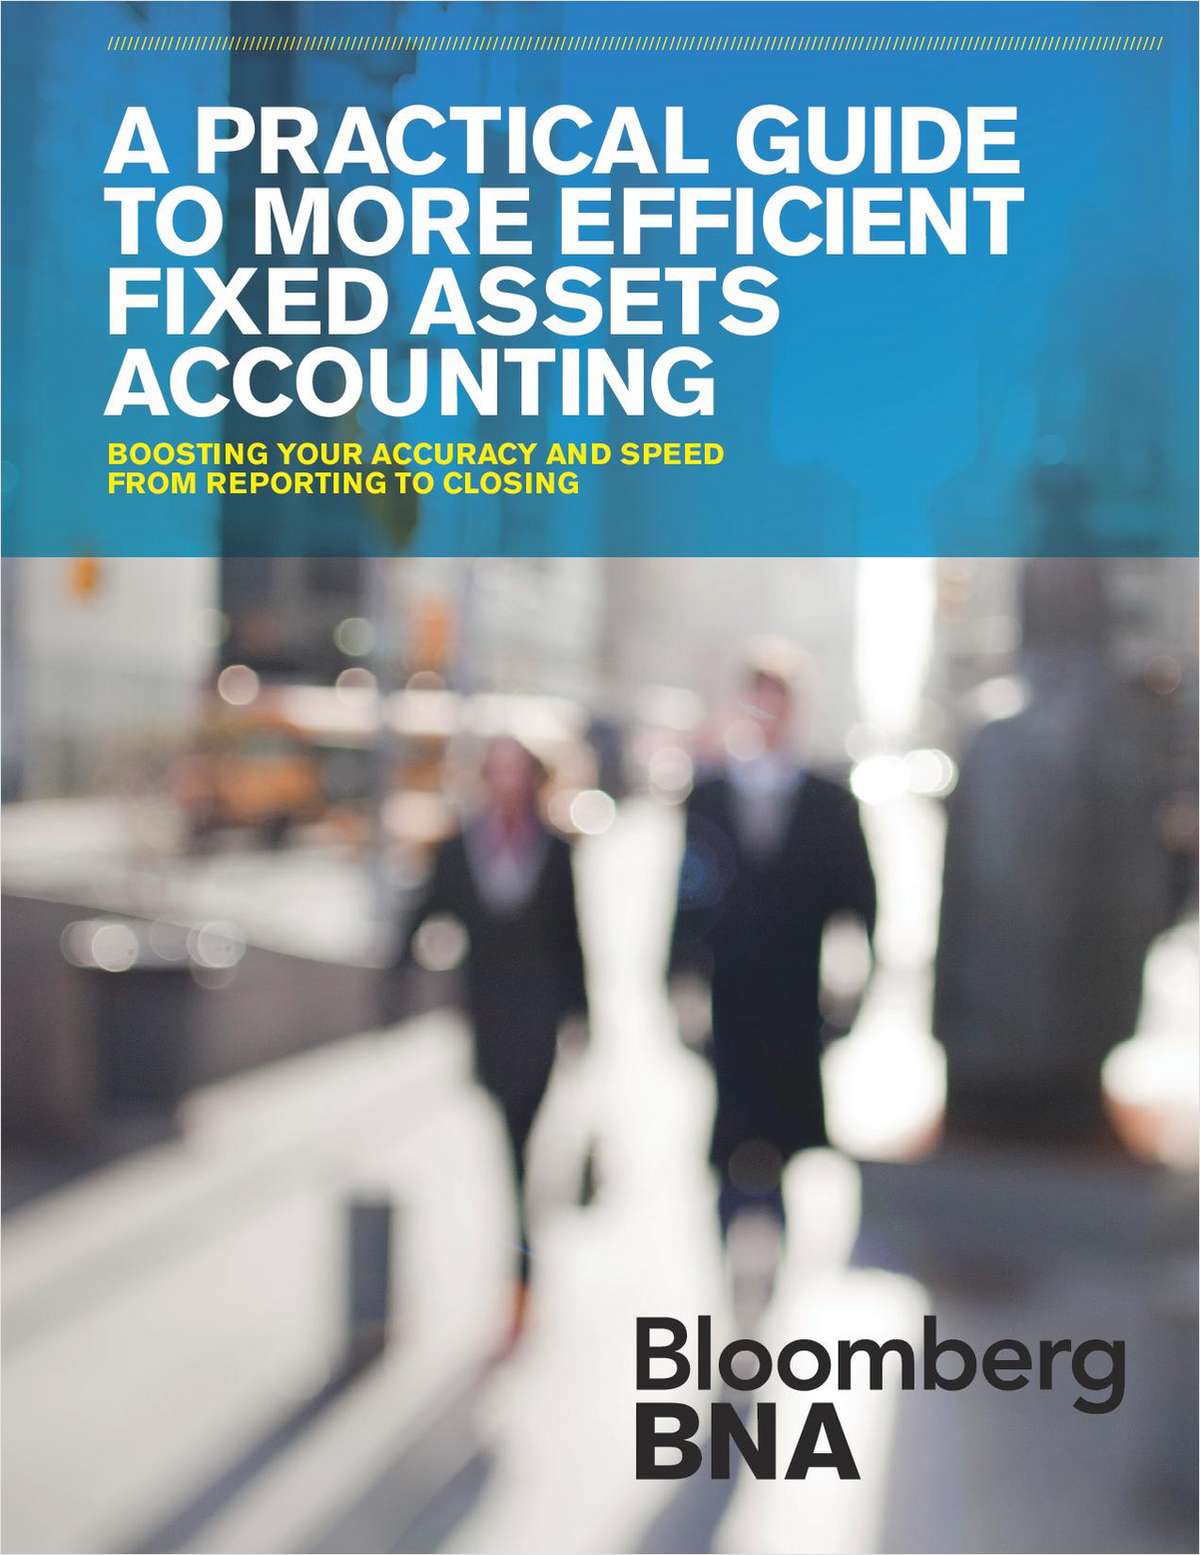 A Practical Guide to More Efficient Fixed Assets Accounting